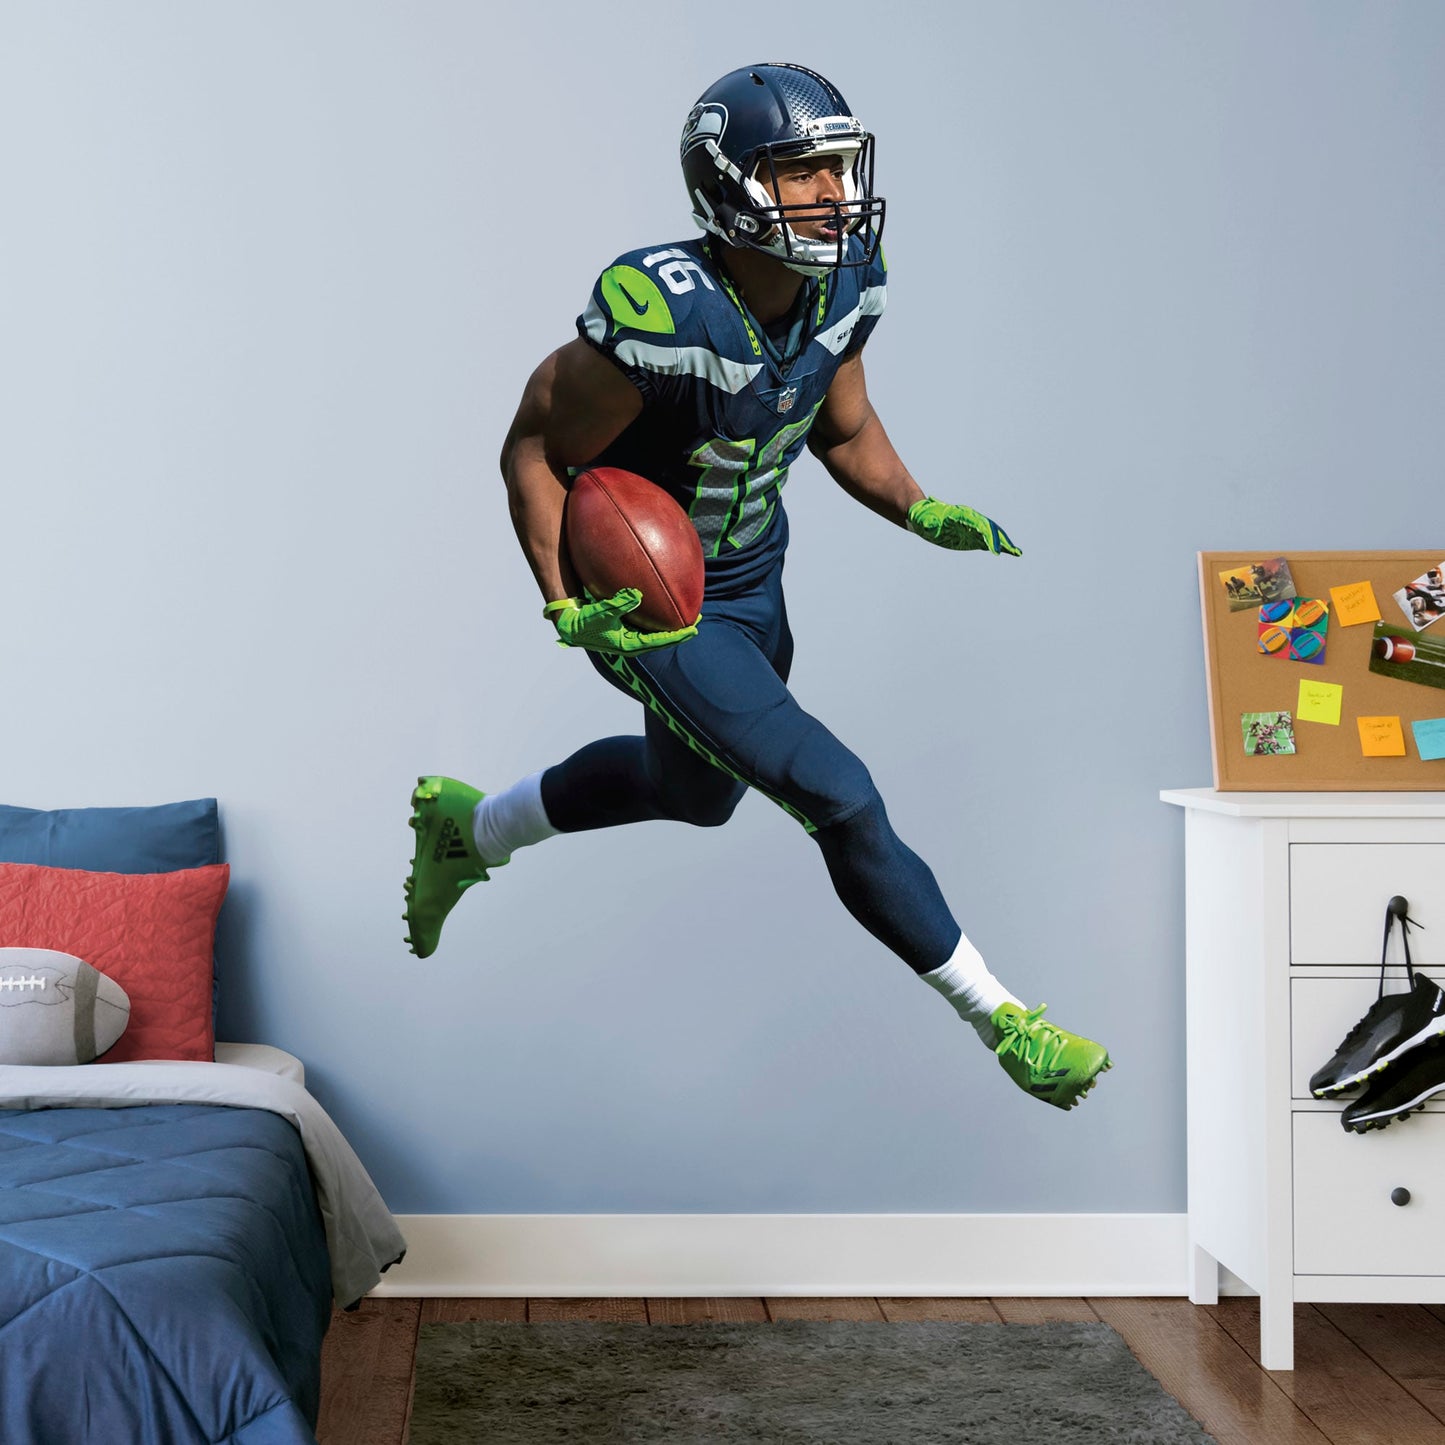 Life-Size Athlete + 2 Decals (52"W x 76"H) Bring the action of the NFL into your home with a wall decal of Tyler Lockett! High quality, durable, and tear resistant, you'll be able to stick and move it as many times as you want to create the ultimate football experience in any room!